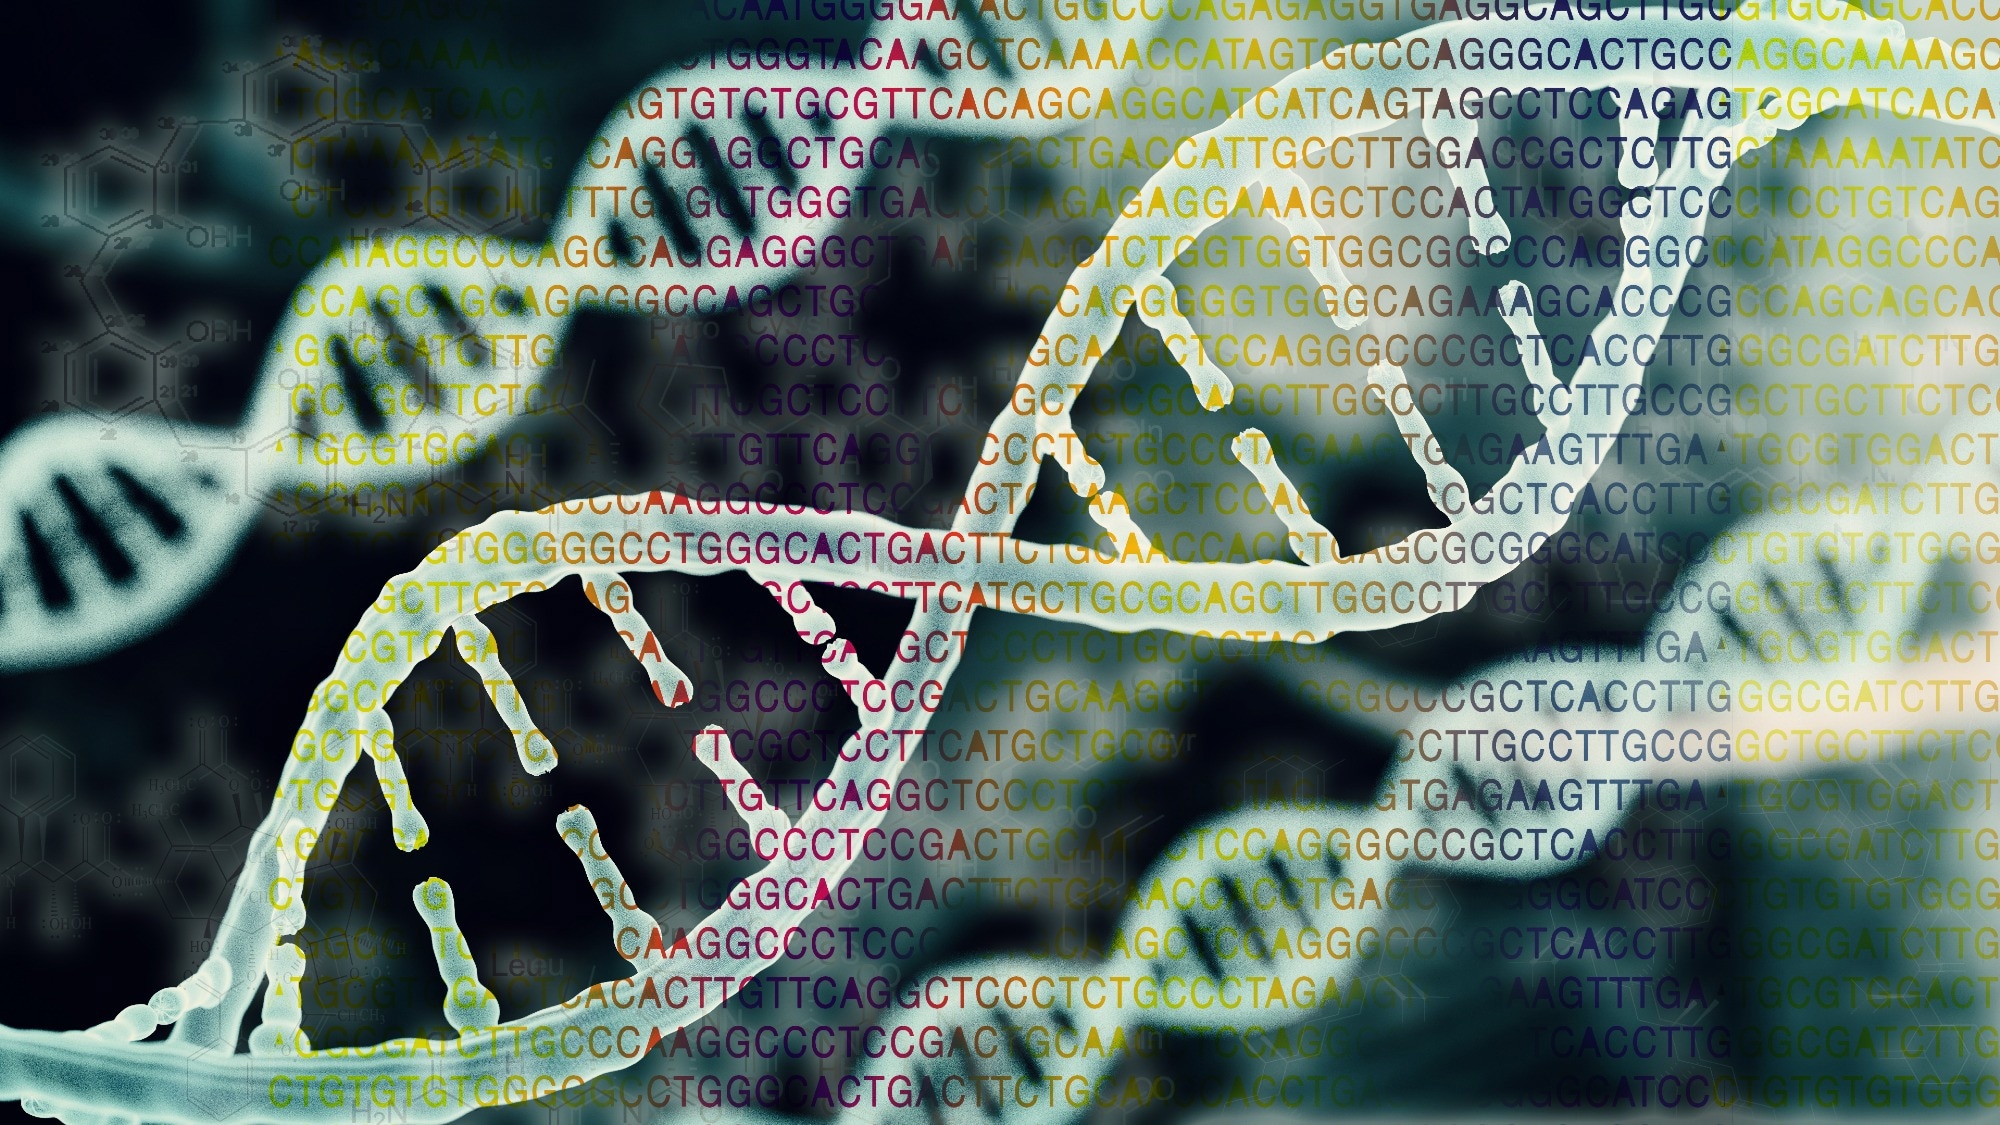 Study: Whole-Genome Sequencing Analysis of Human Metabolome in Multi-Ethnic Populations. Image Credit: CI Photos / Shutterstock